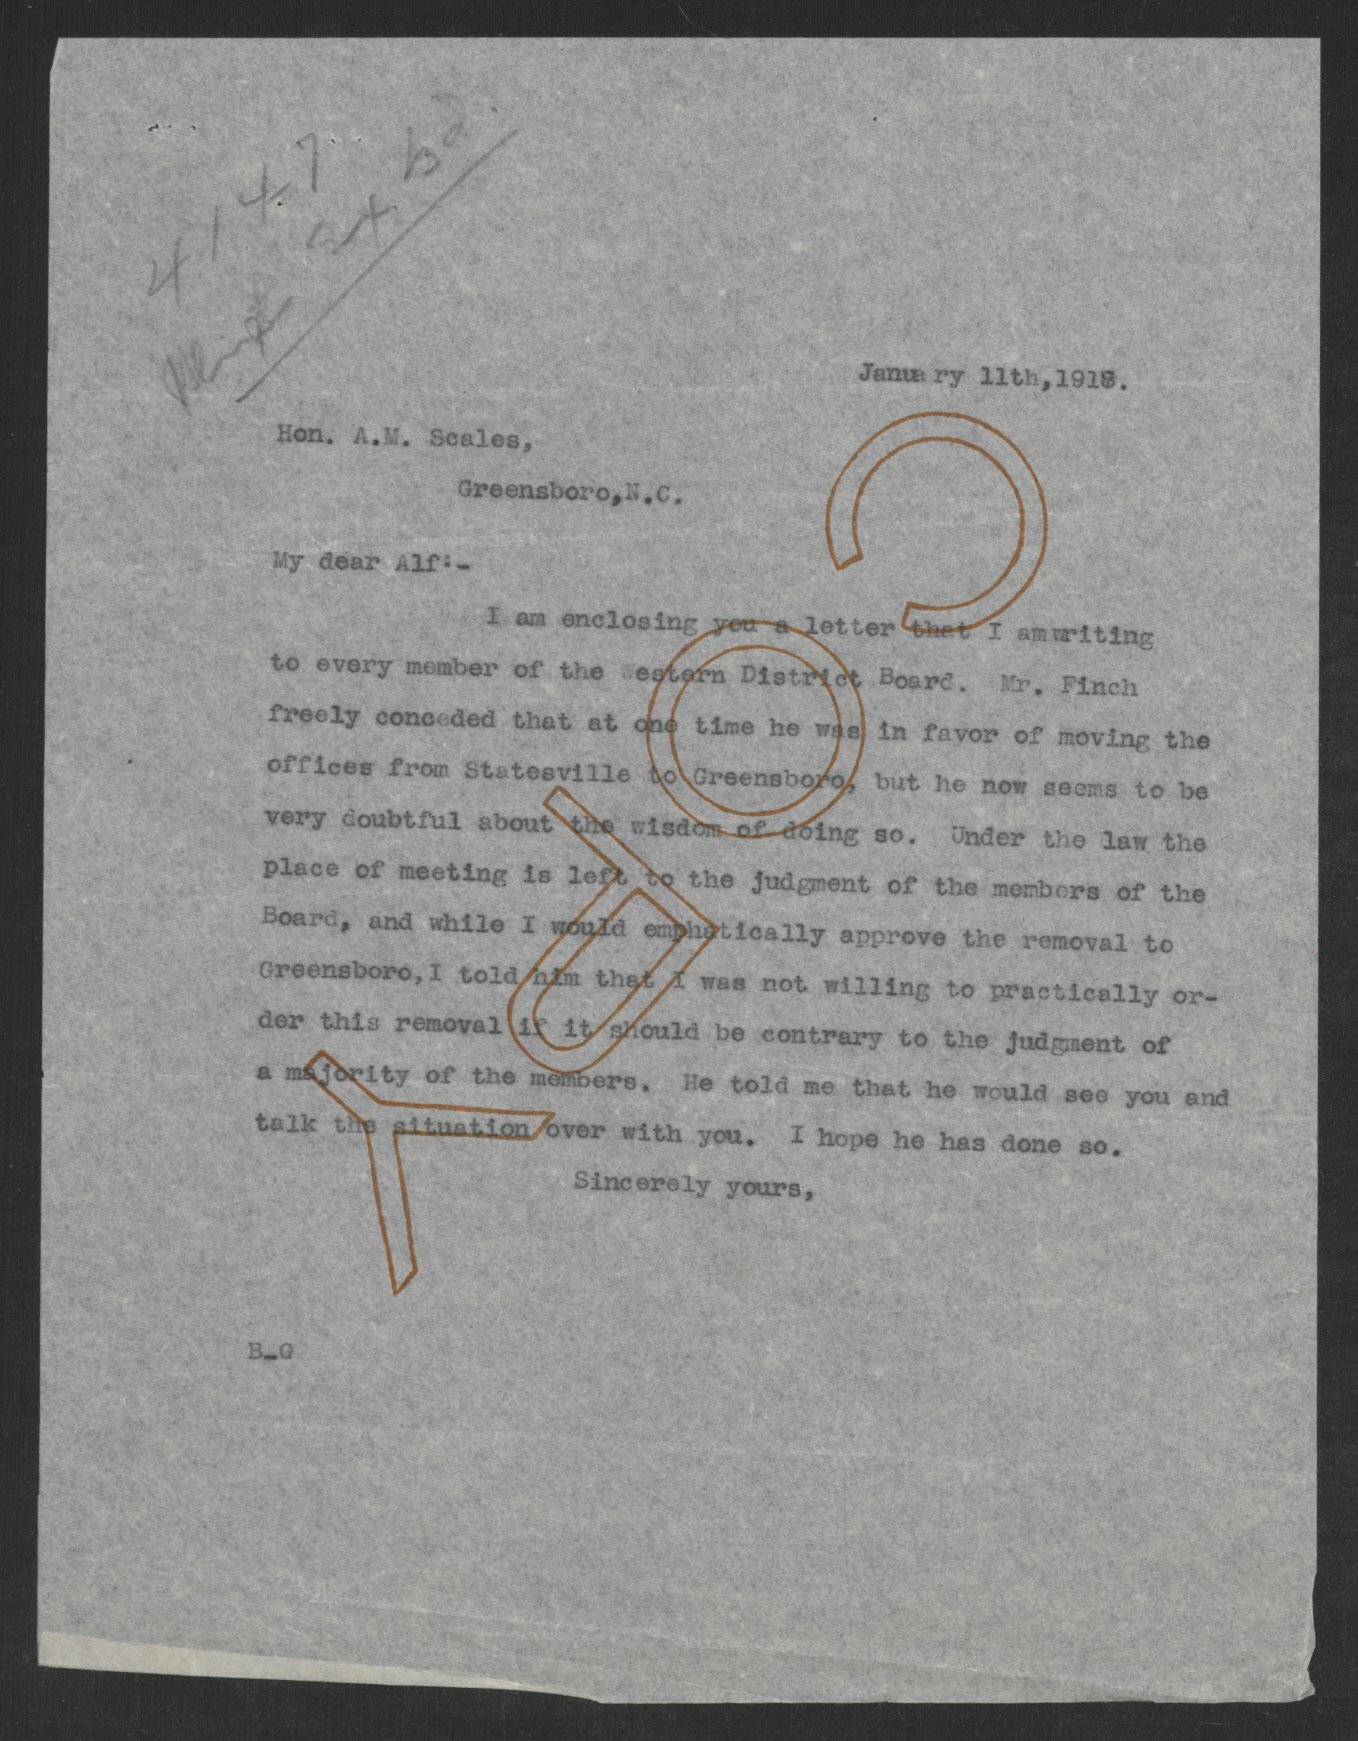 Letter from Thomas W. Bickett to Alfred M. Scales, January 11, 1918